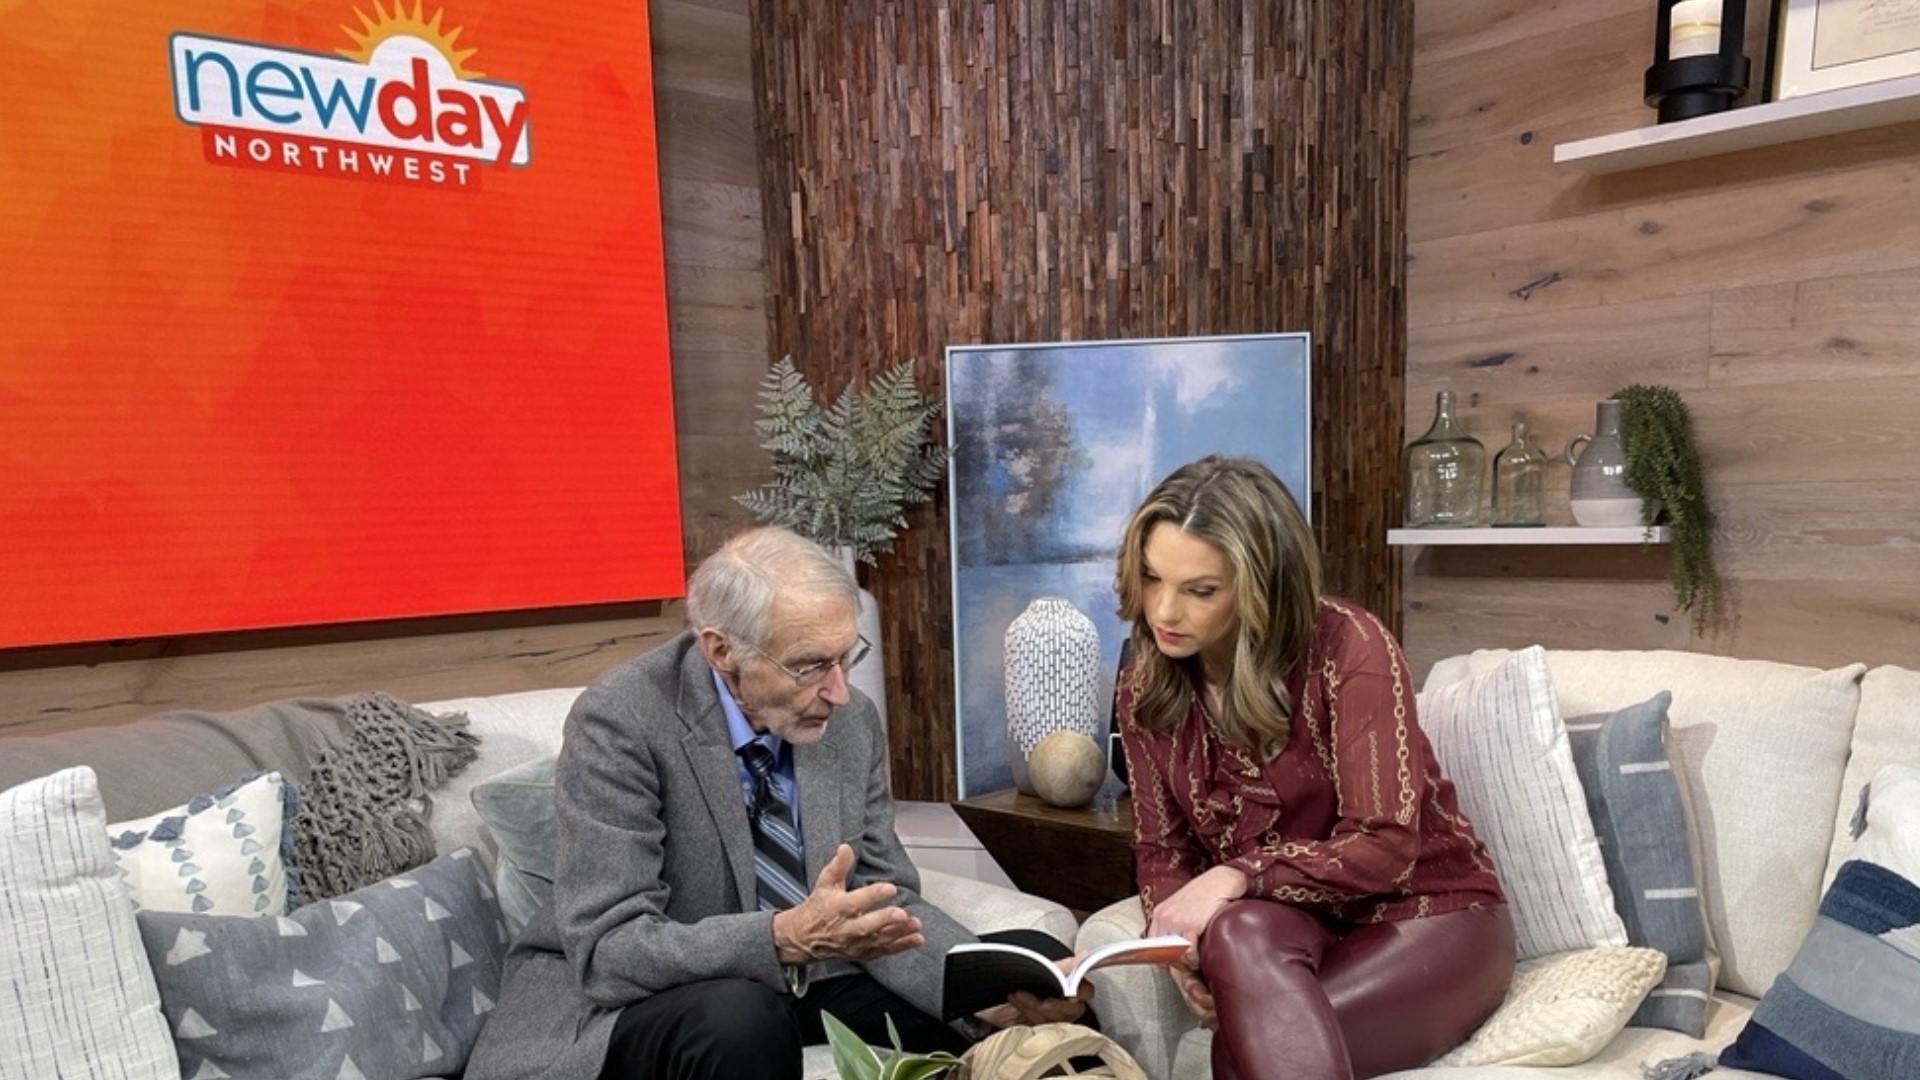 Author Stephen Bezruchka shares how his new book takes a look at how COVID impacted society as a whole and what we can learn from it. #newdaynw